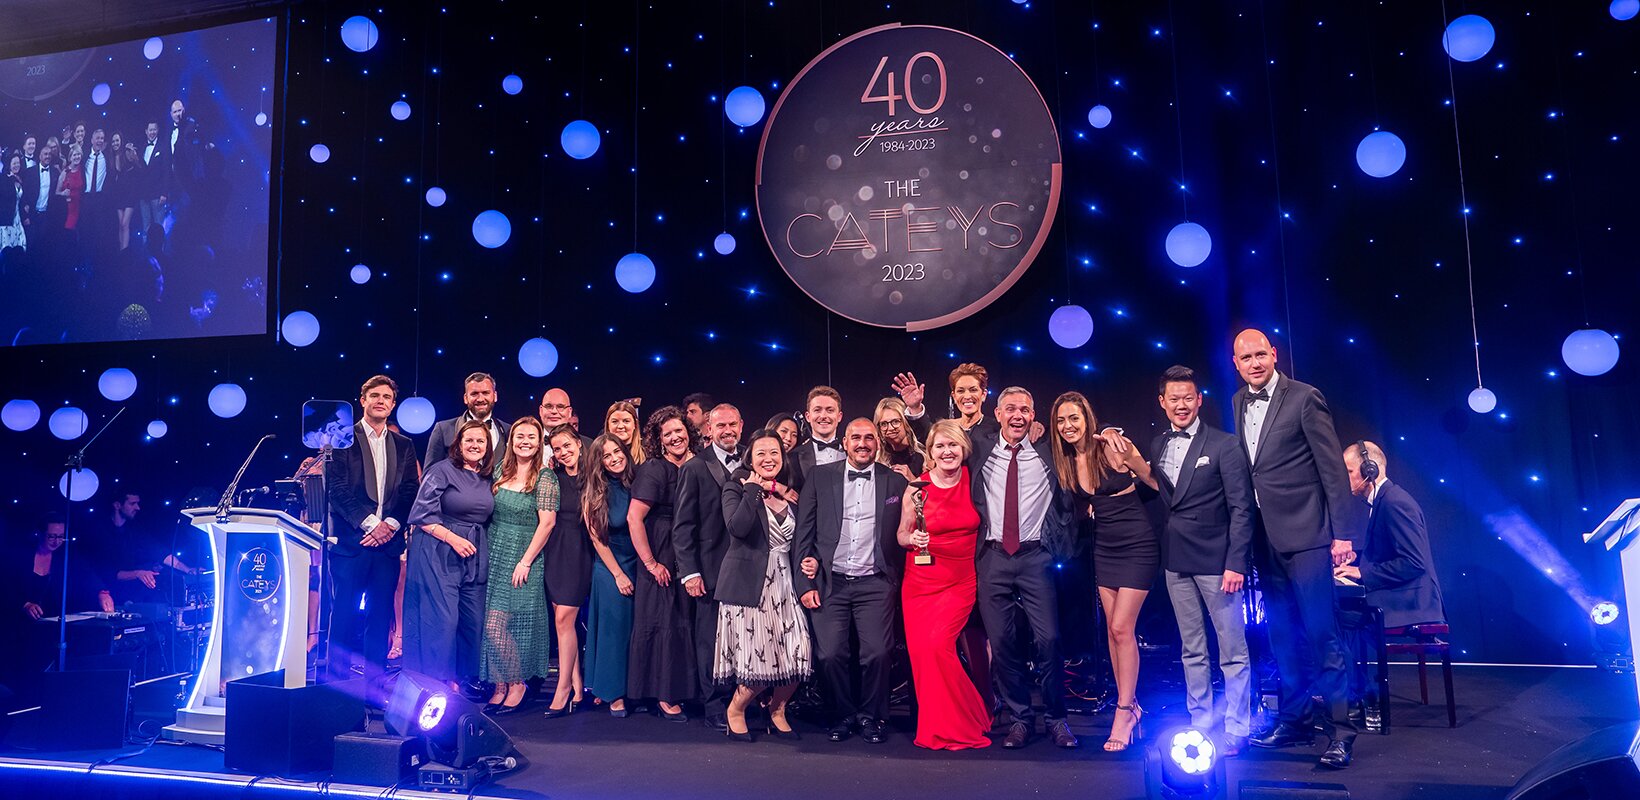 The Cateys: 8 tips to write a winning award entry